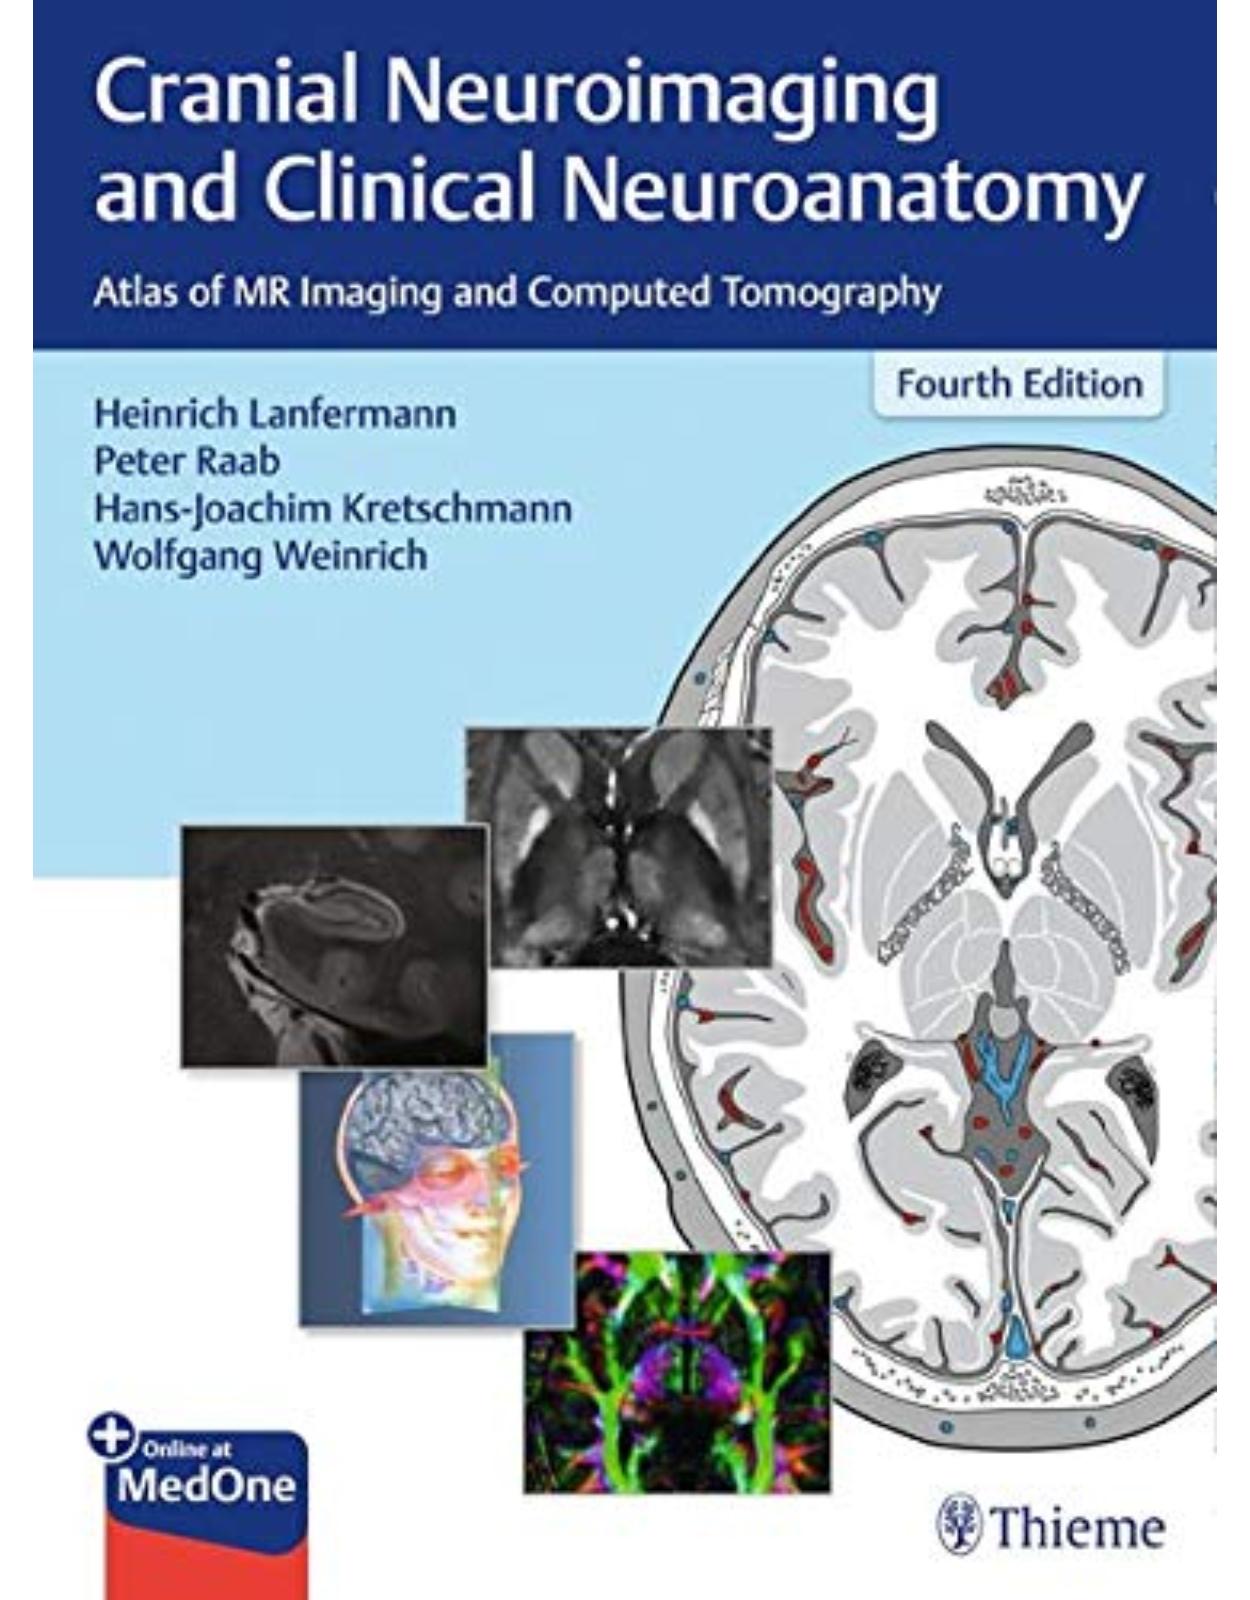 Cranial Neuroimaging and Clinical Neuroanatomy: Atlas of MR Imaging and Computed Tomography